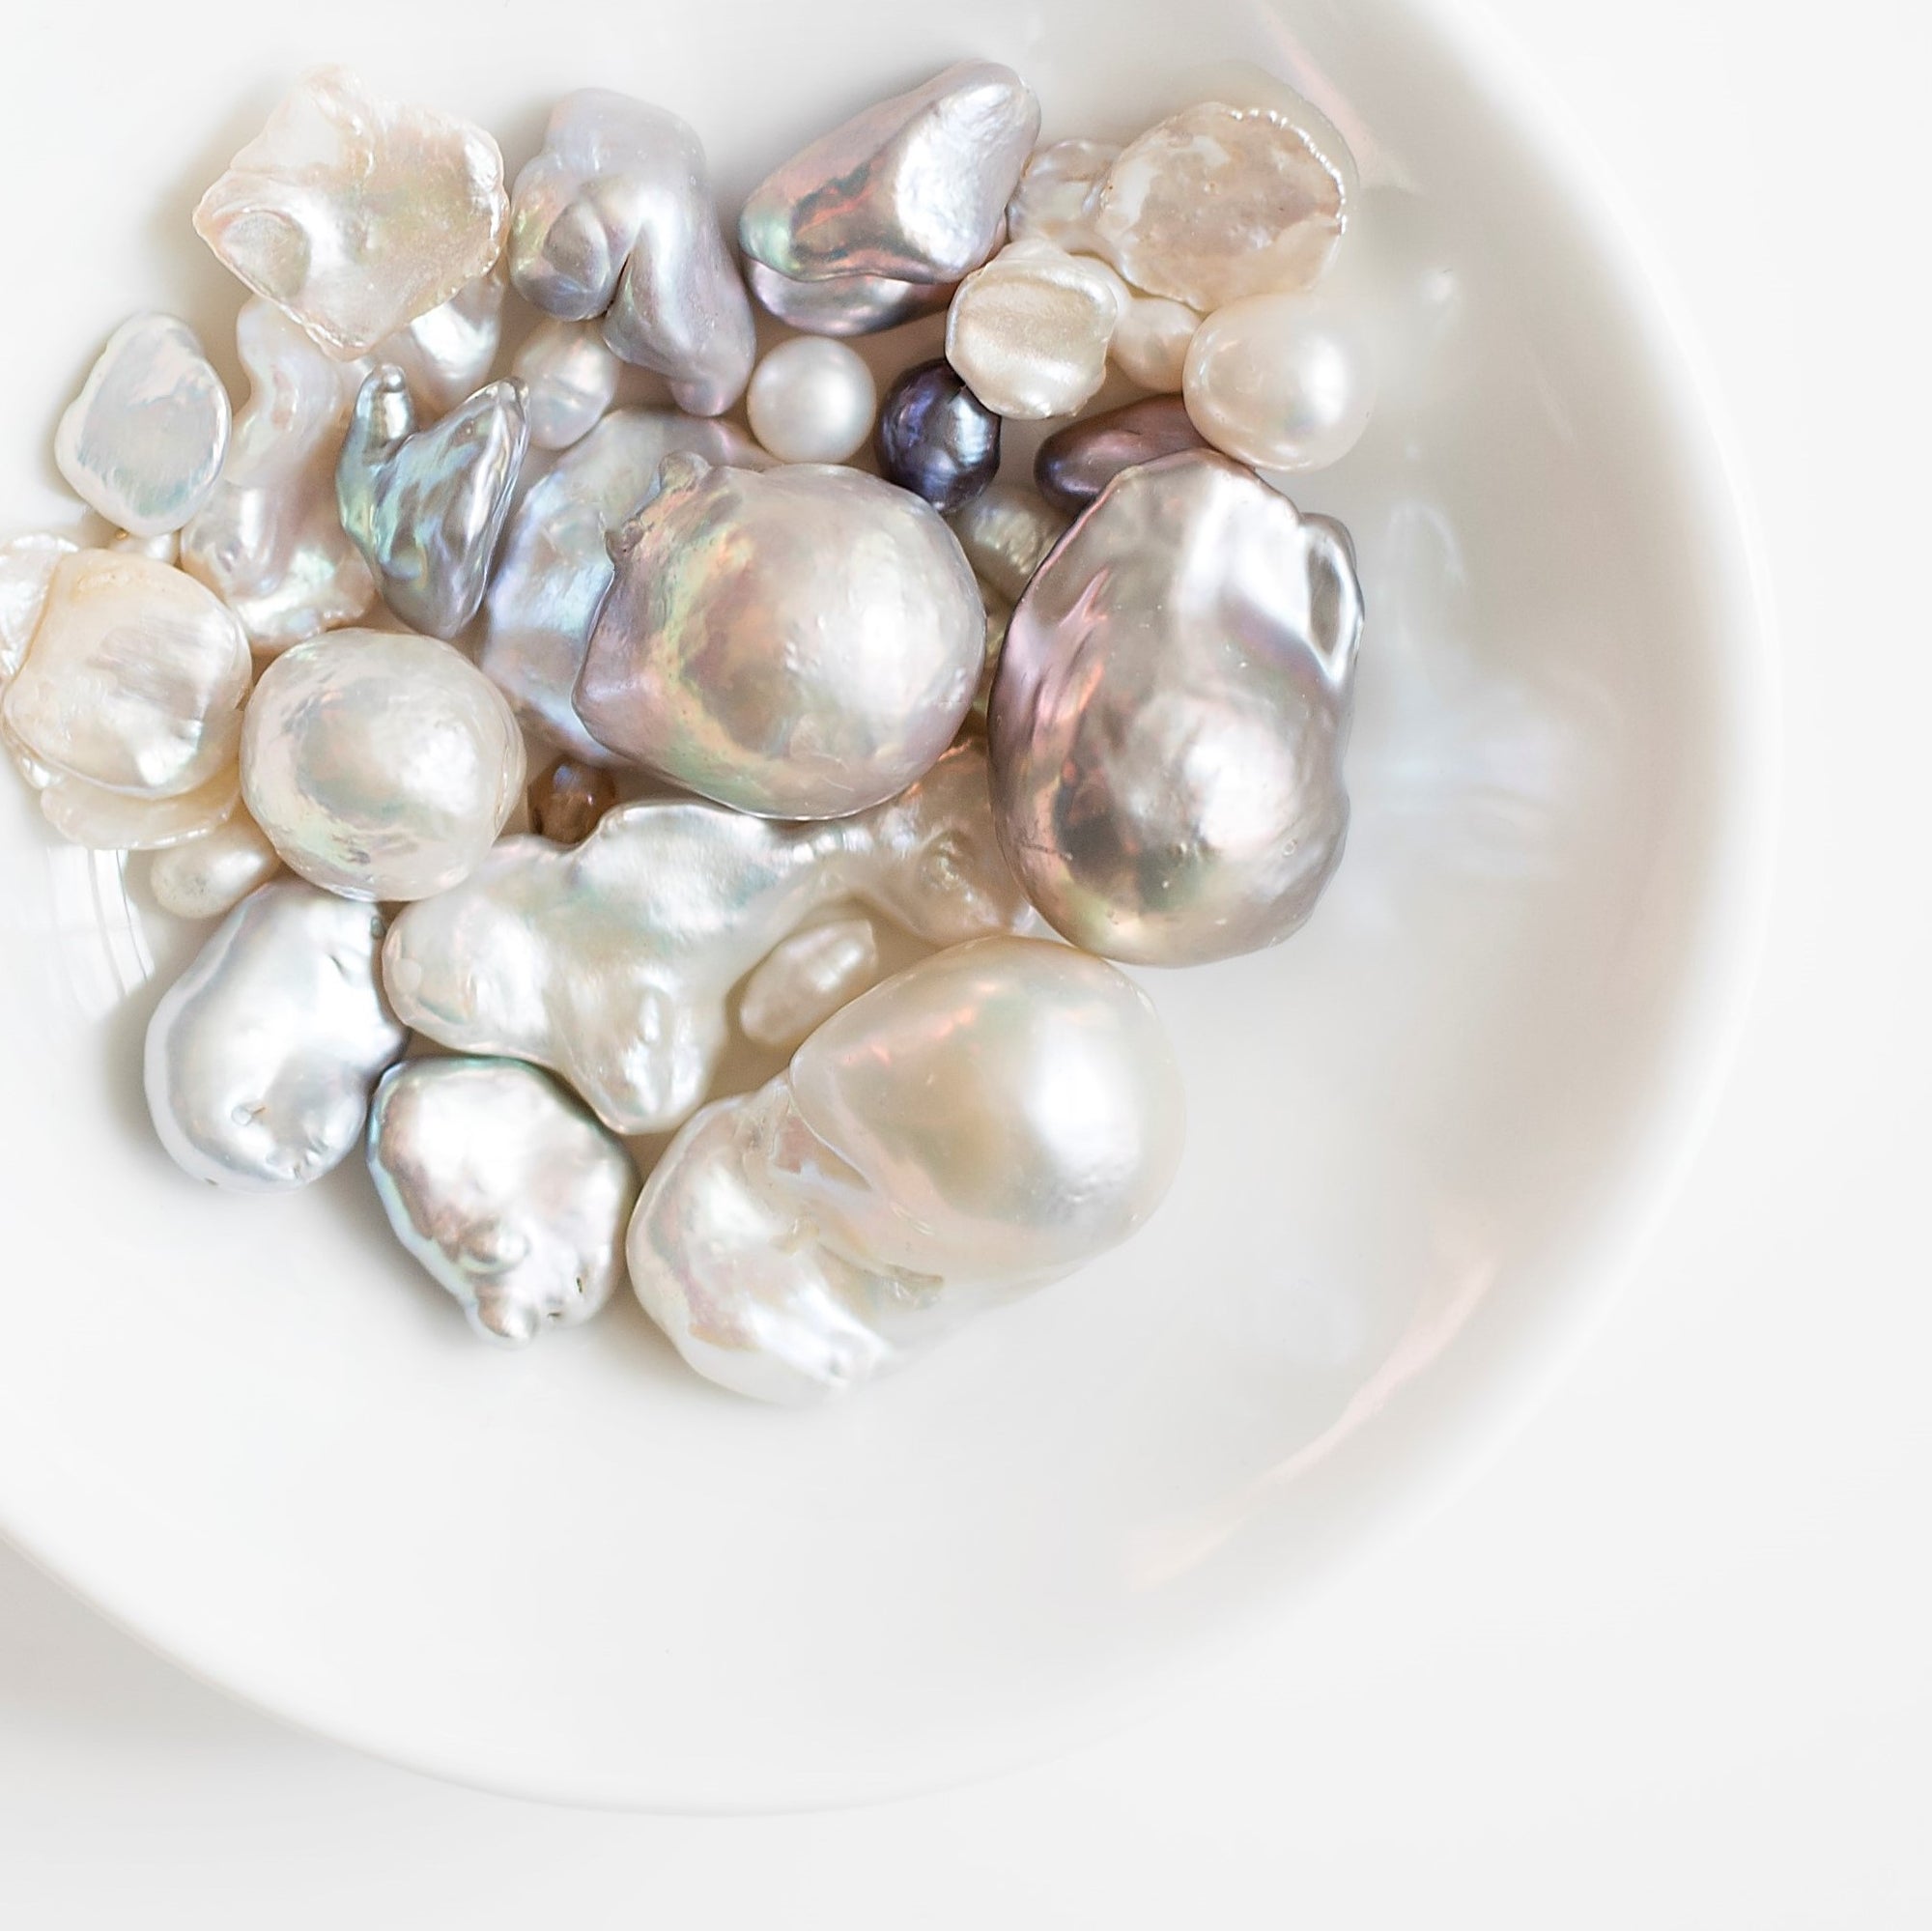 Pearl Treasured for centuries, pearls have long represented values of high significance across many cultures- wisdom, purity, and the generosity of nature. In modern times, pearls remain known as a tribute to classic and enduring beauty. We're constantly 